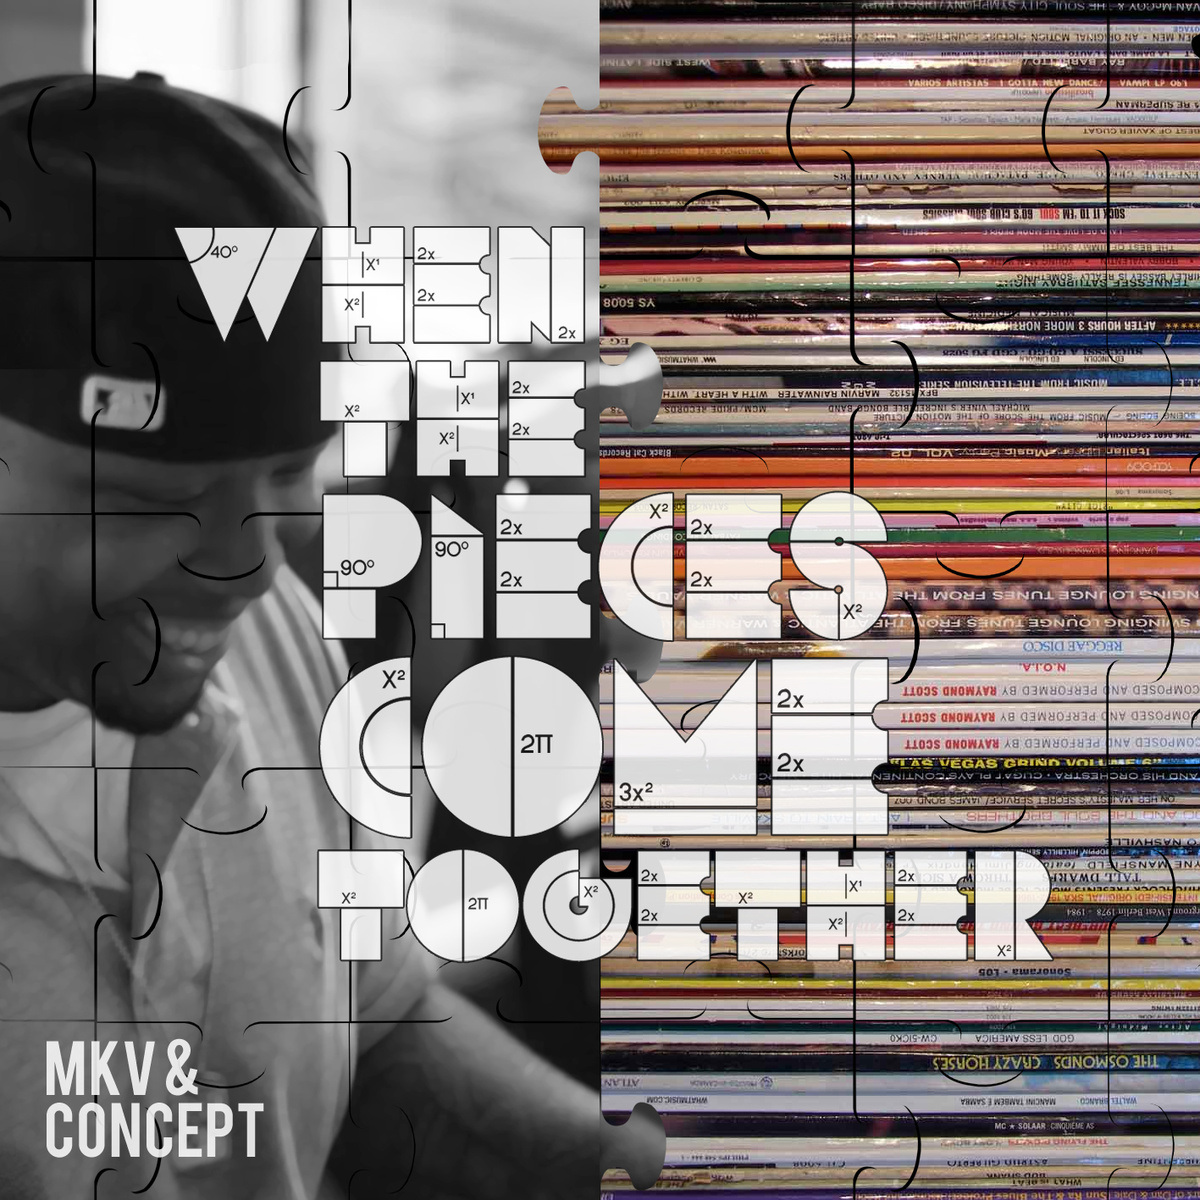 Free Download: MKV & Concept – When The Pieces Come Together